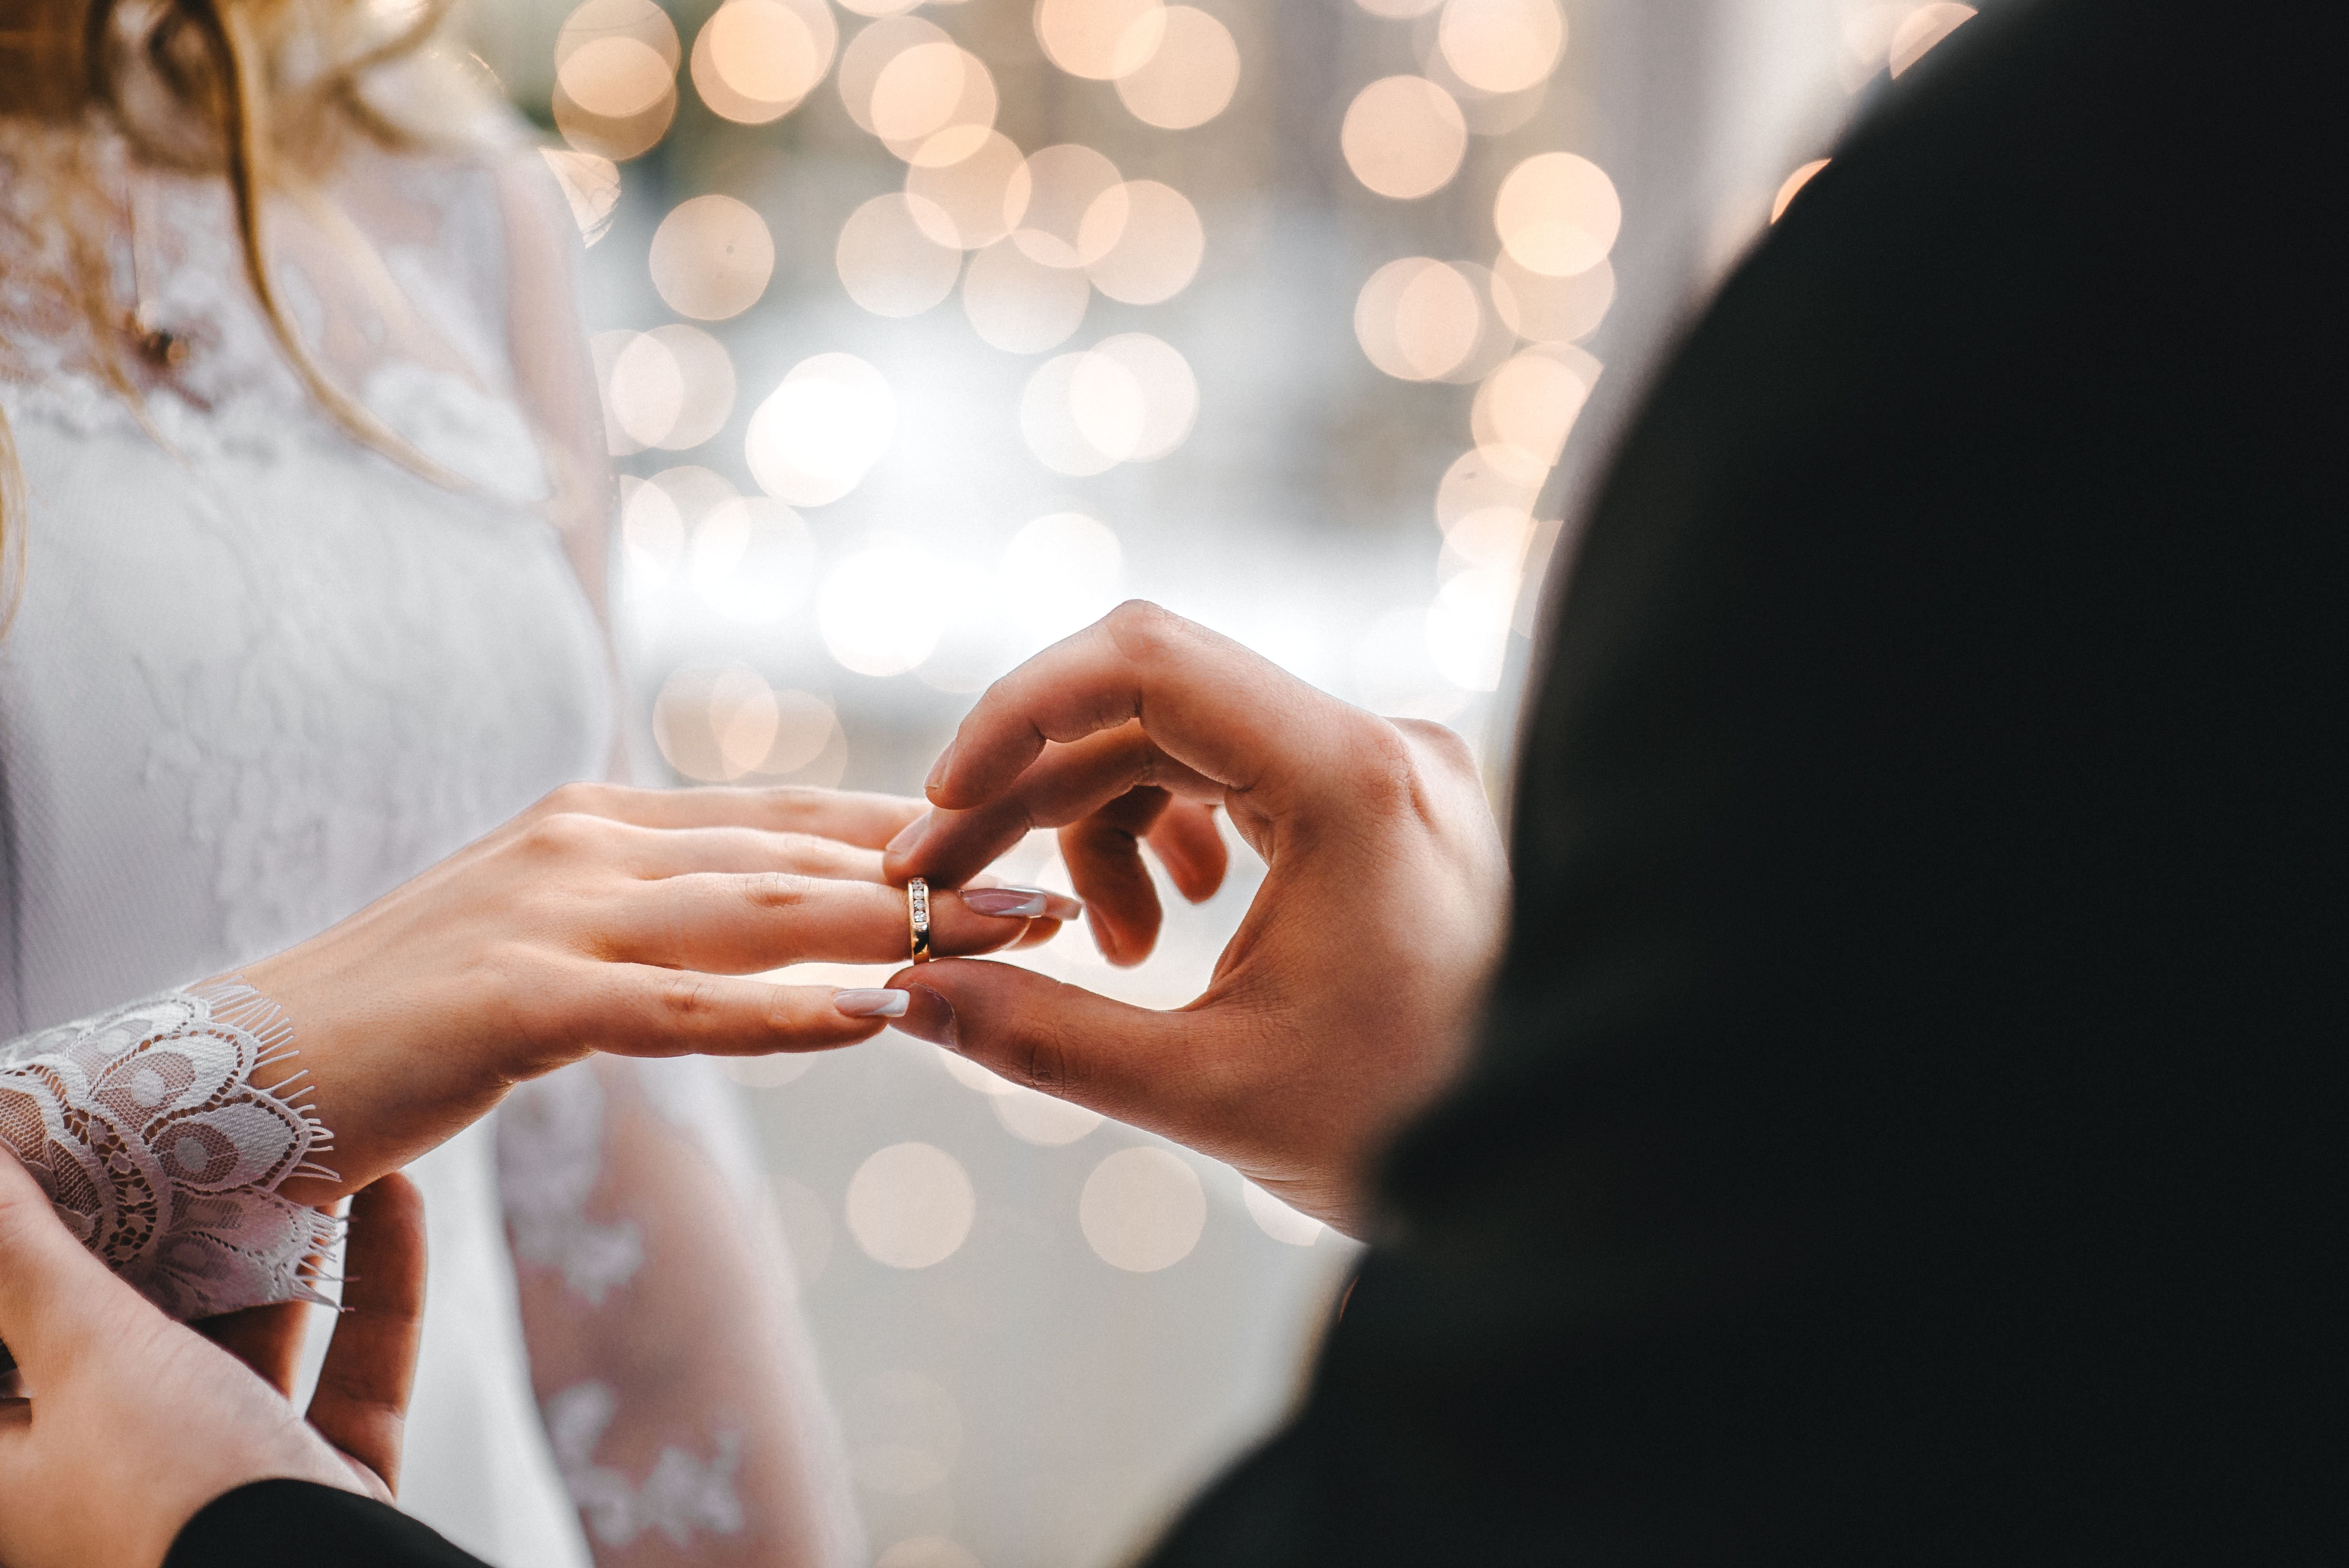 A groom placing the wedding ring on his bride’s finger at the ceremony. | Source: Shutterstock 